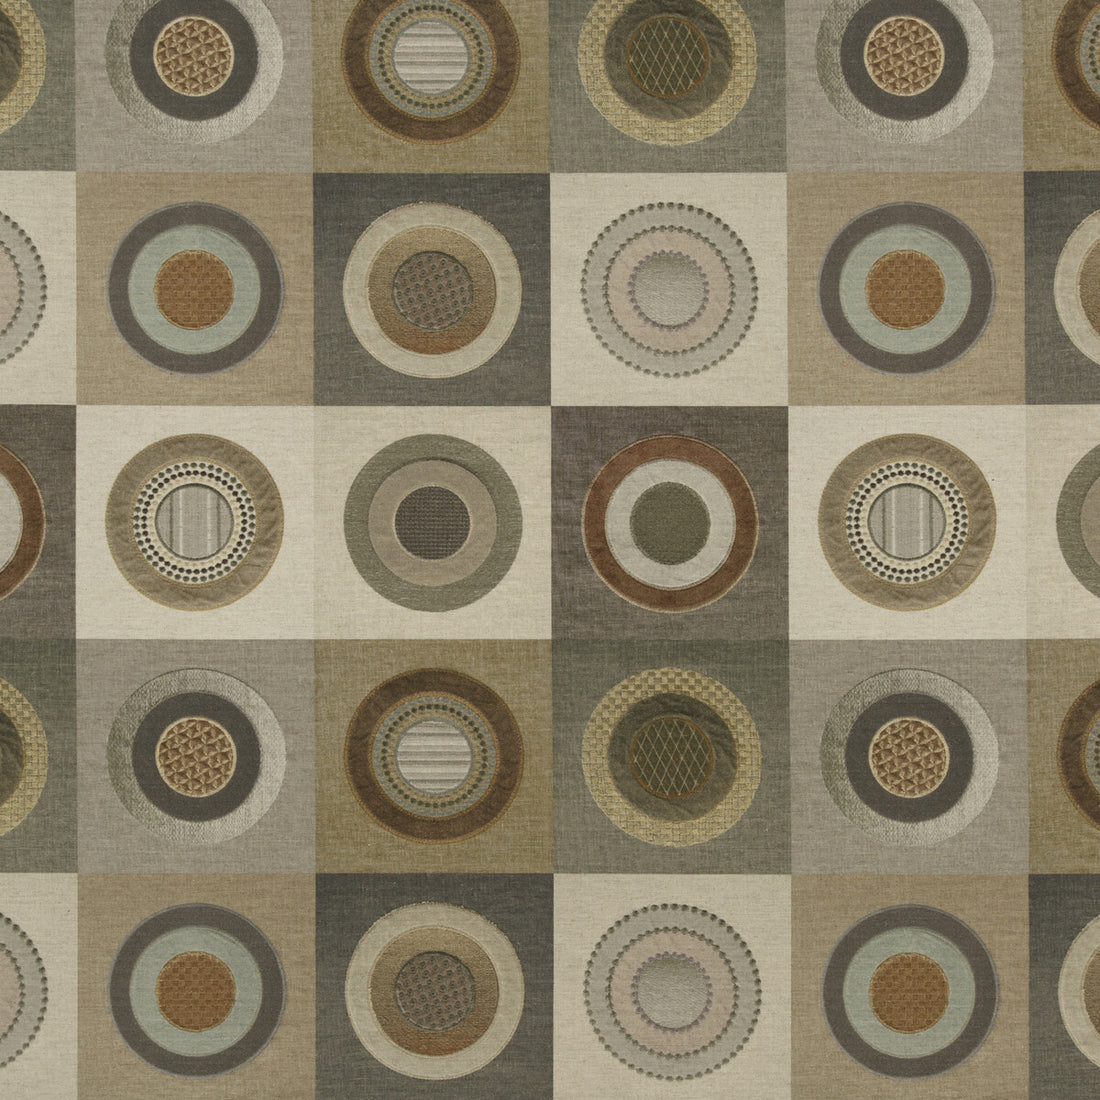 Dress Circle Linen fabric in warm grey color - pattern FD291.A45.0 - by Mulberry in the Festival collection